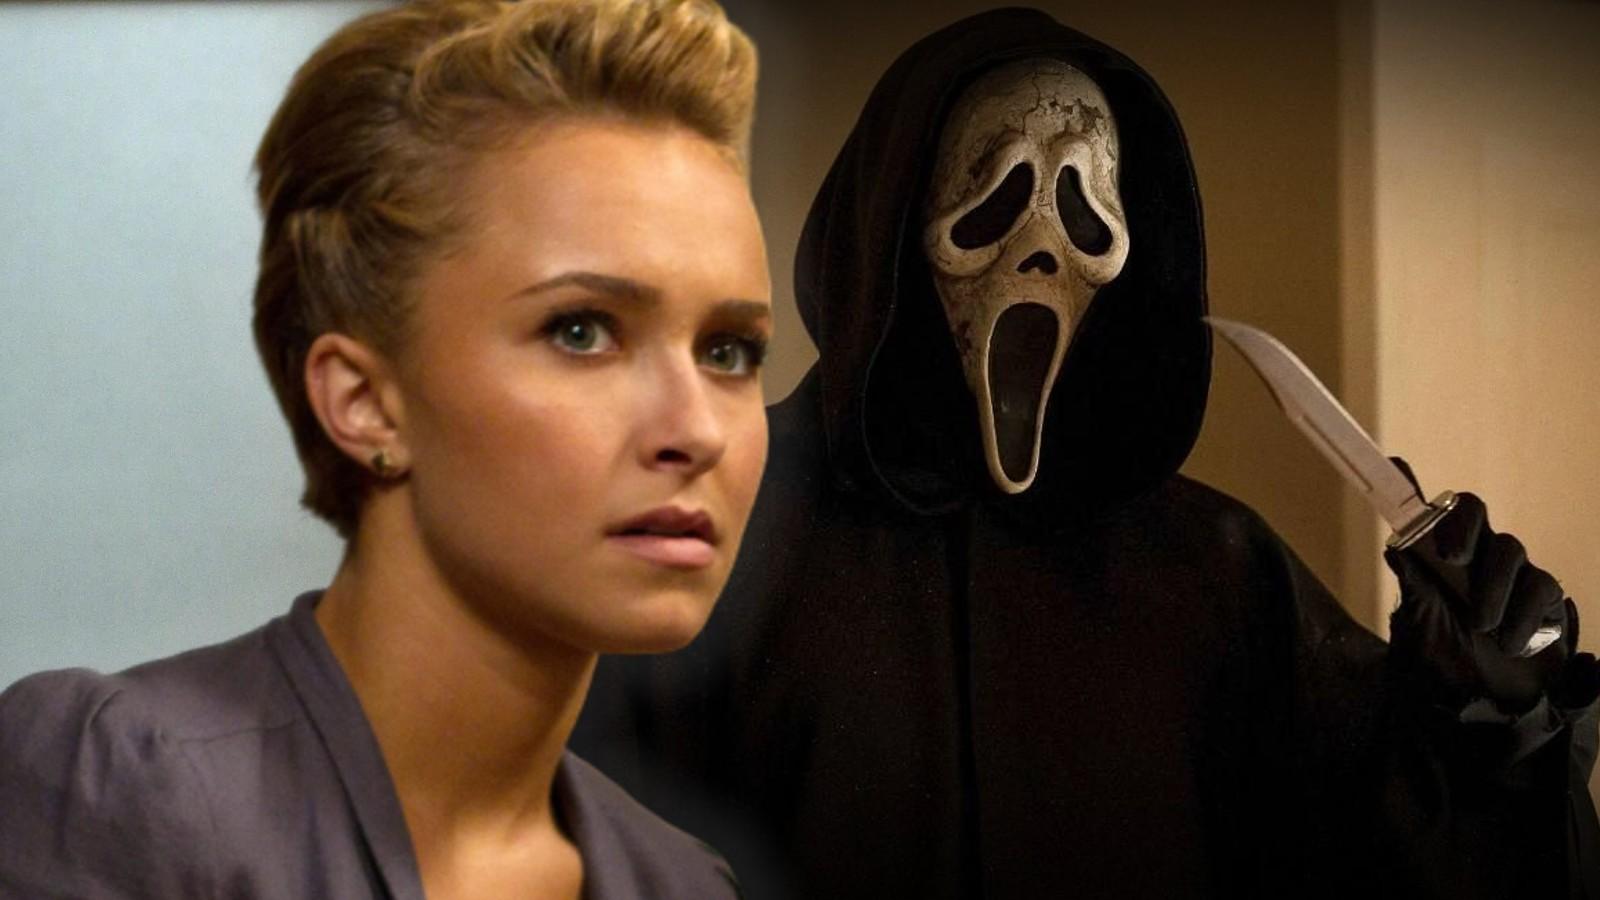 Scream 6 trailer: Hayden Panettiere to return as Kirby, with Wednesday's  Jenna Ortega joining the cast